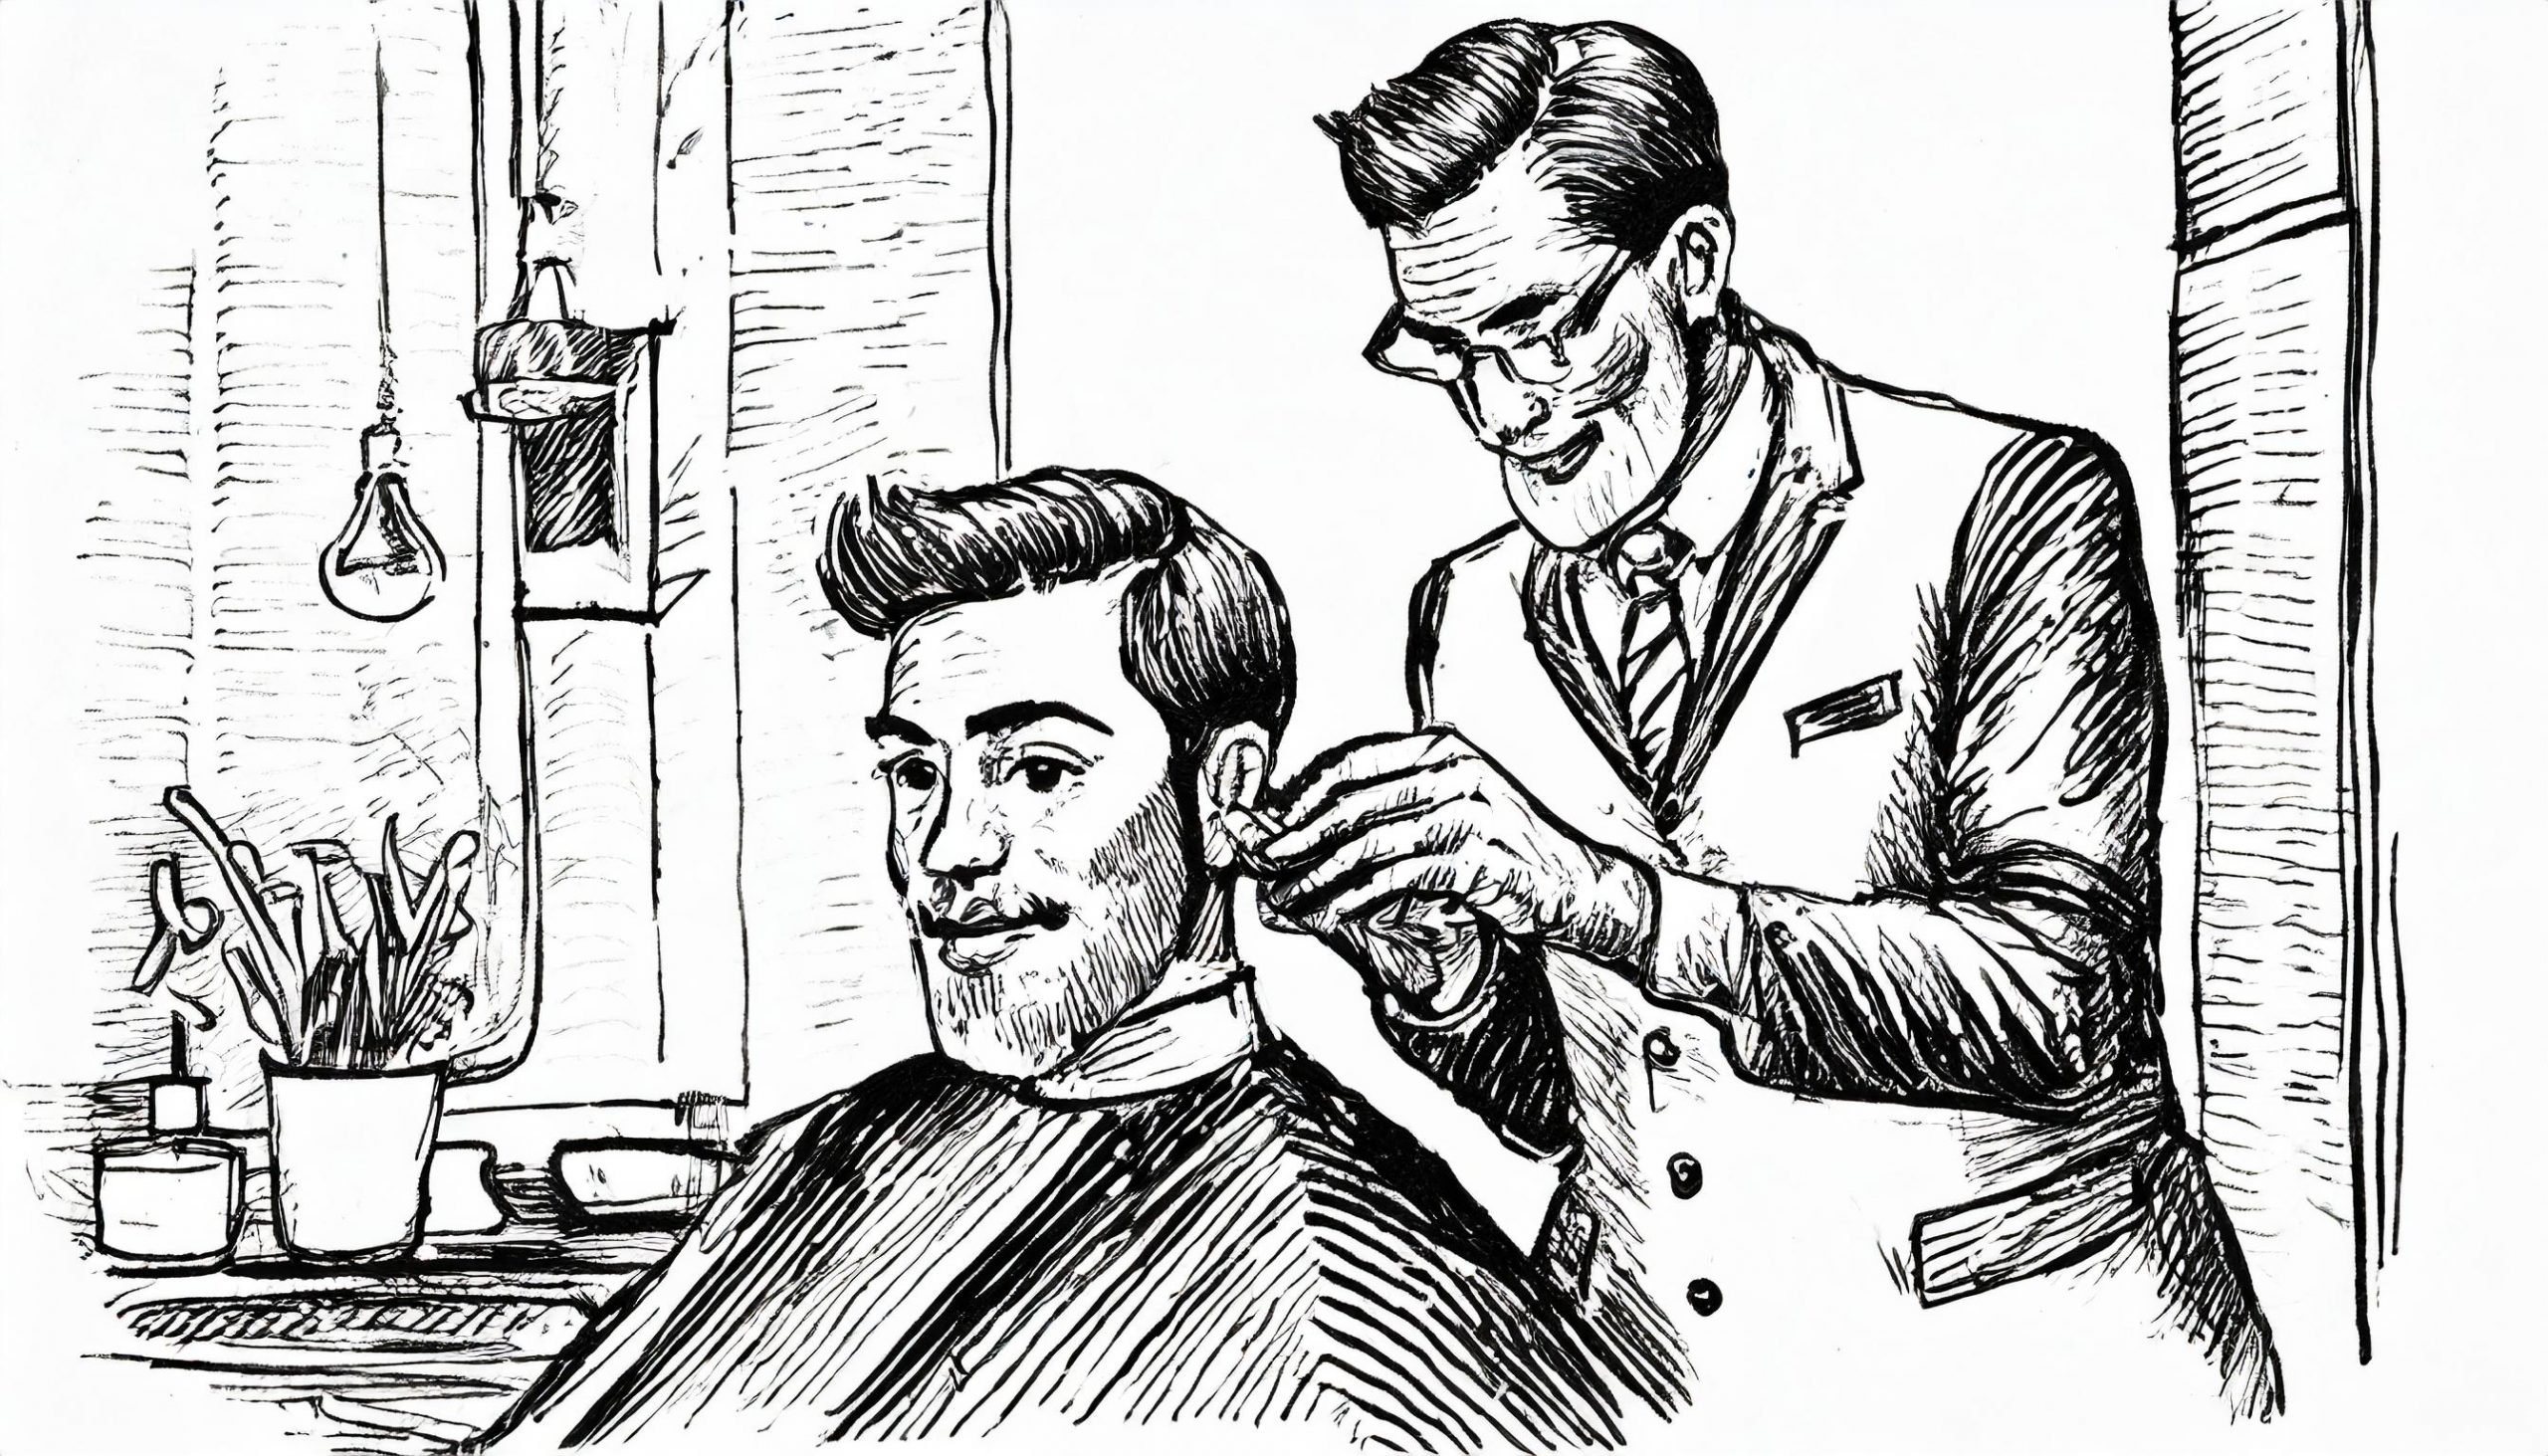 Sketch in black and white, late thirties of the twentieth century, a hairdresser shaves a customer in a barber's chair